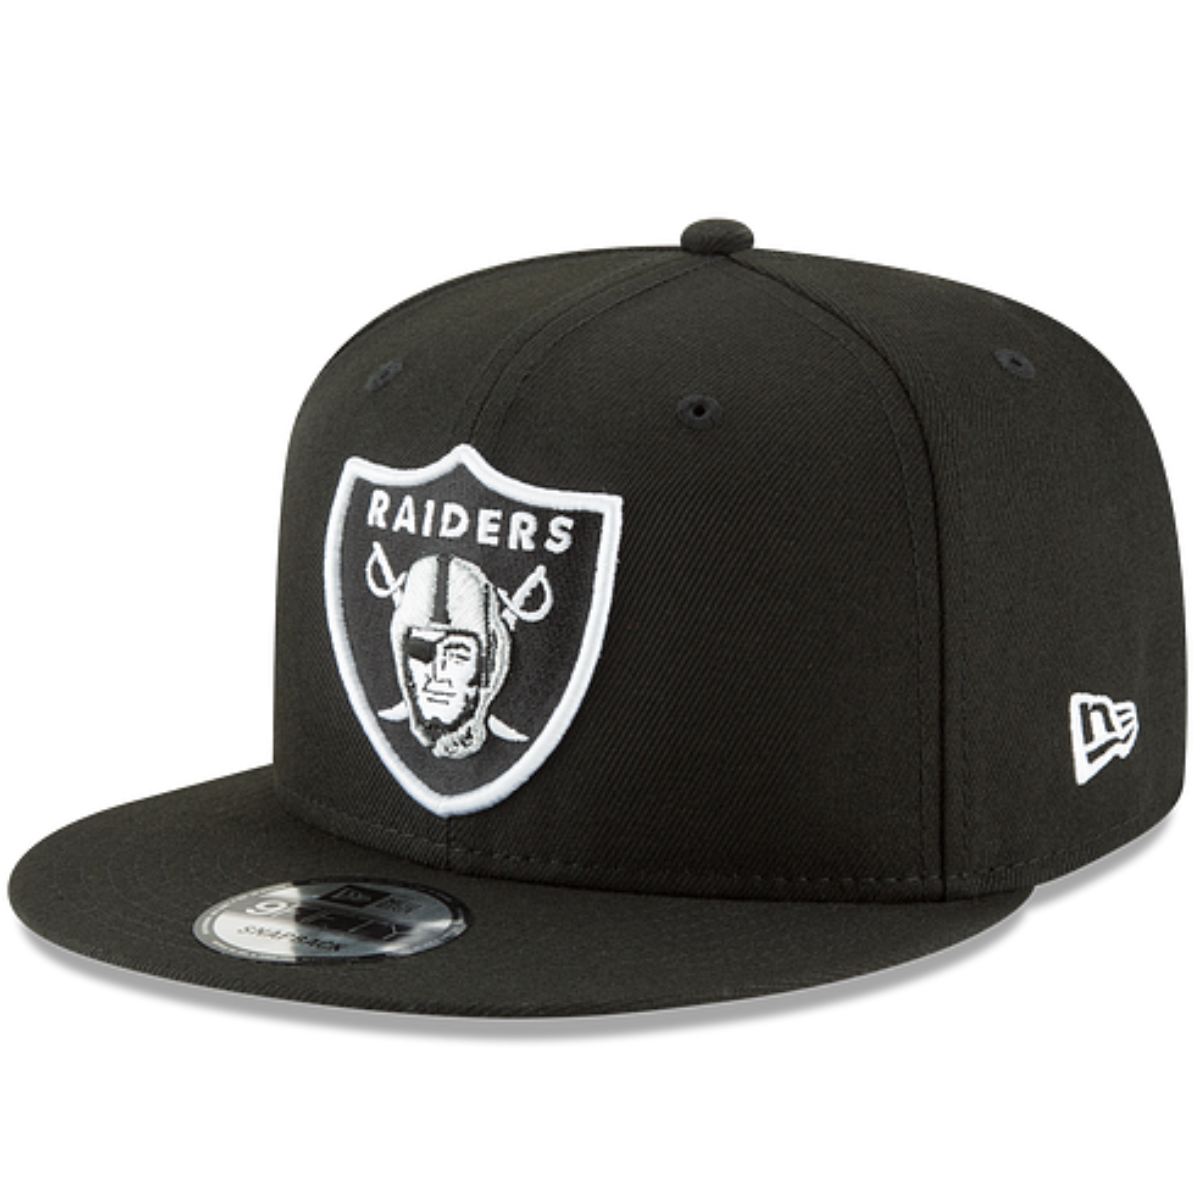 RAIDERS 9FIFTY NFL OTC 9IFTY BASIC COLLECTION SNAPBACK-BLACK THE COLISEUM NVSOCCER.COM